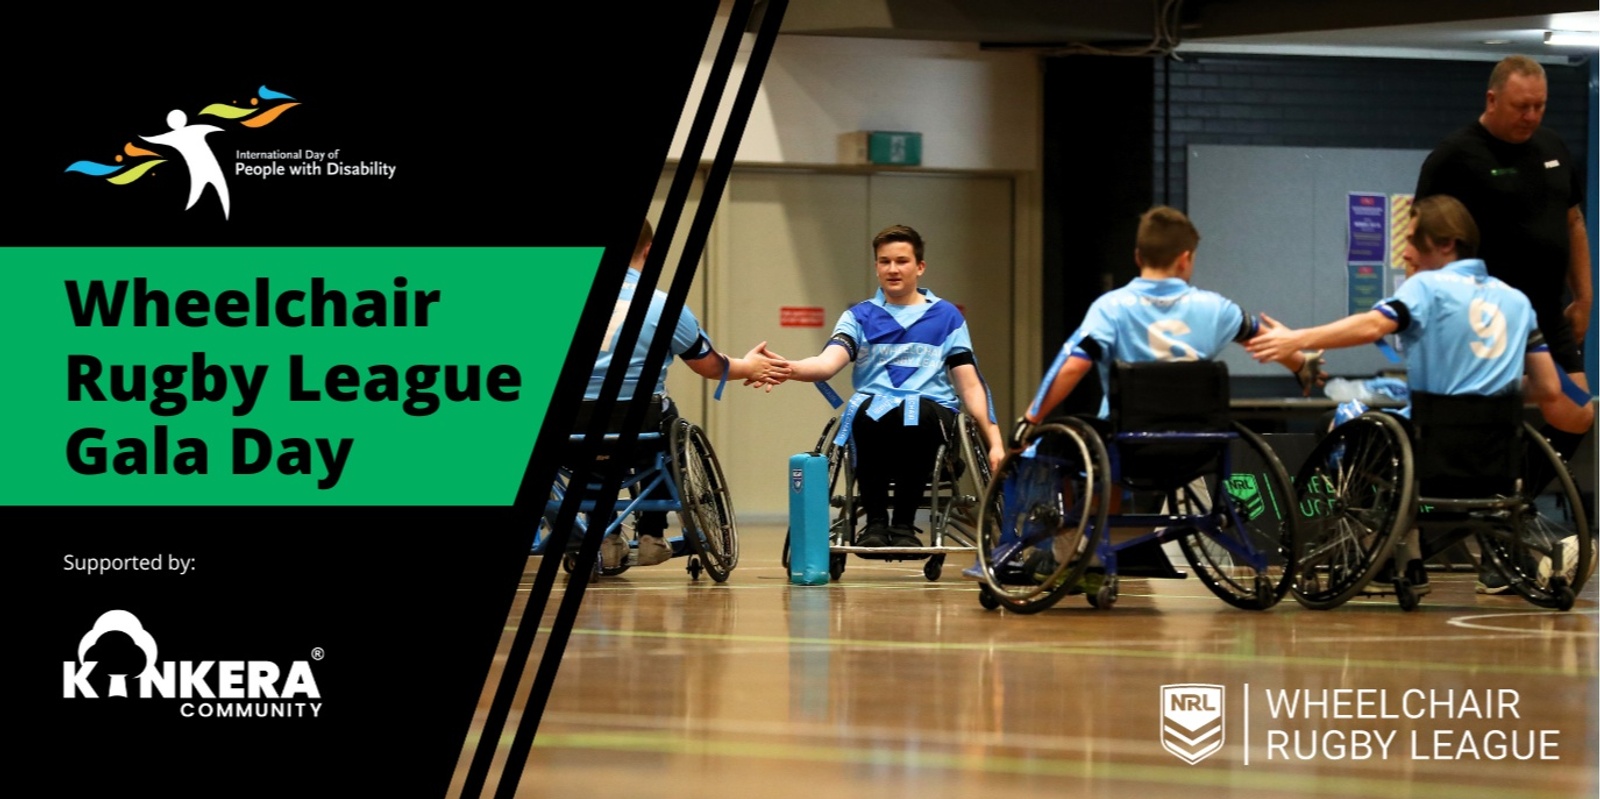 Banner image for International Day of People with Disability Wheelchair Rugby League Gala Day